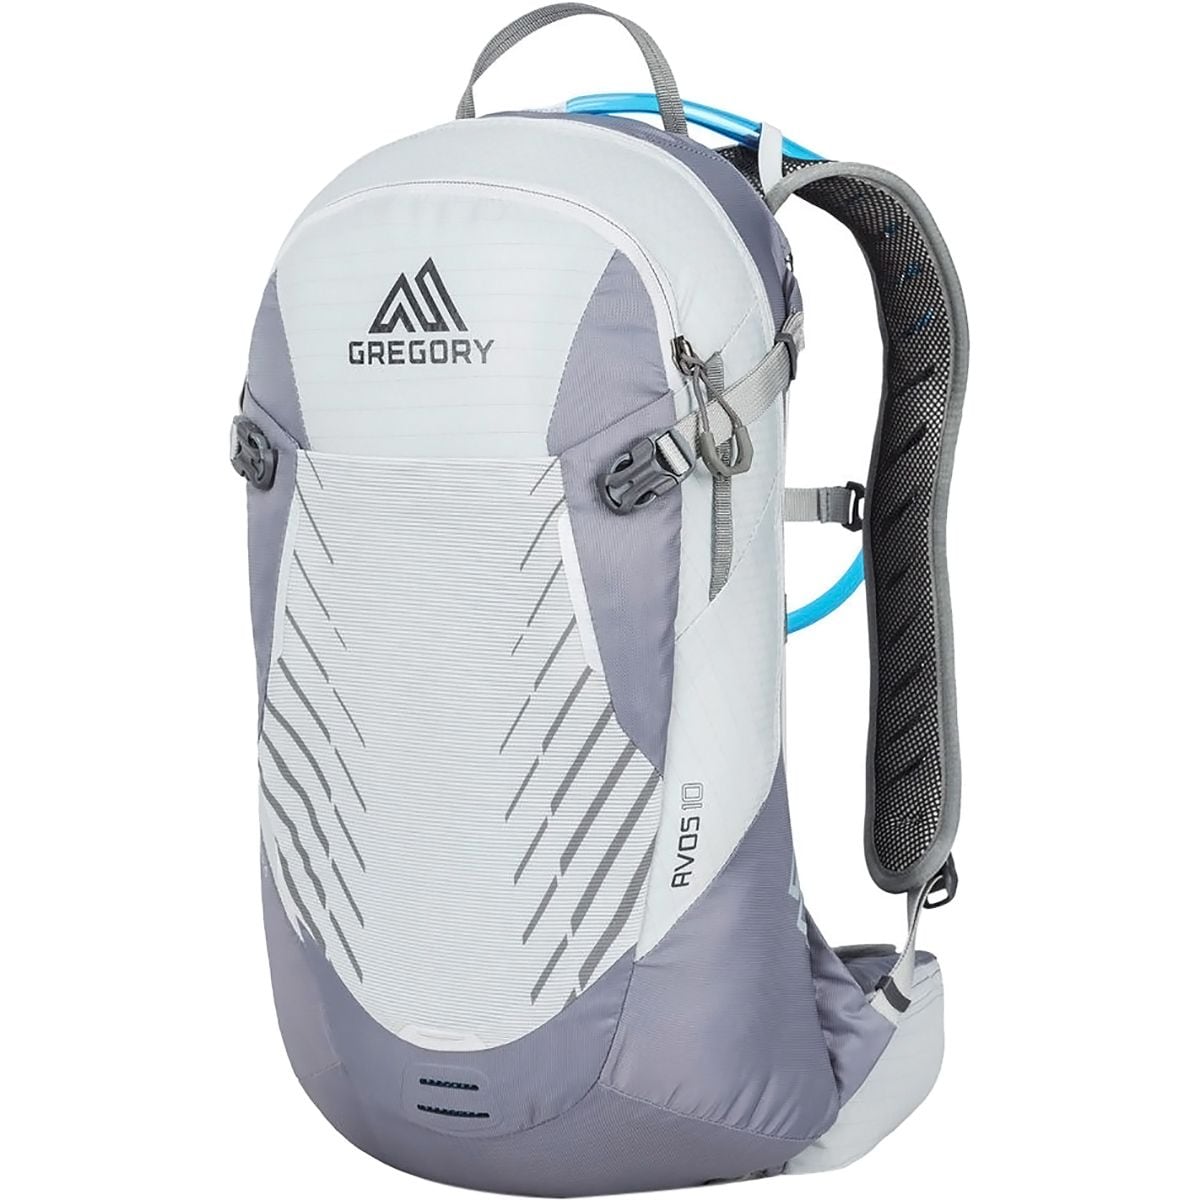 Photos - Backpack Gregory Avos 10L Hydration  - Women's 